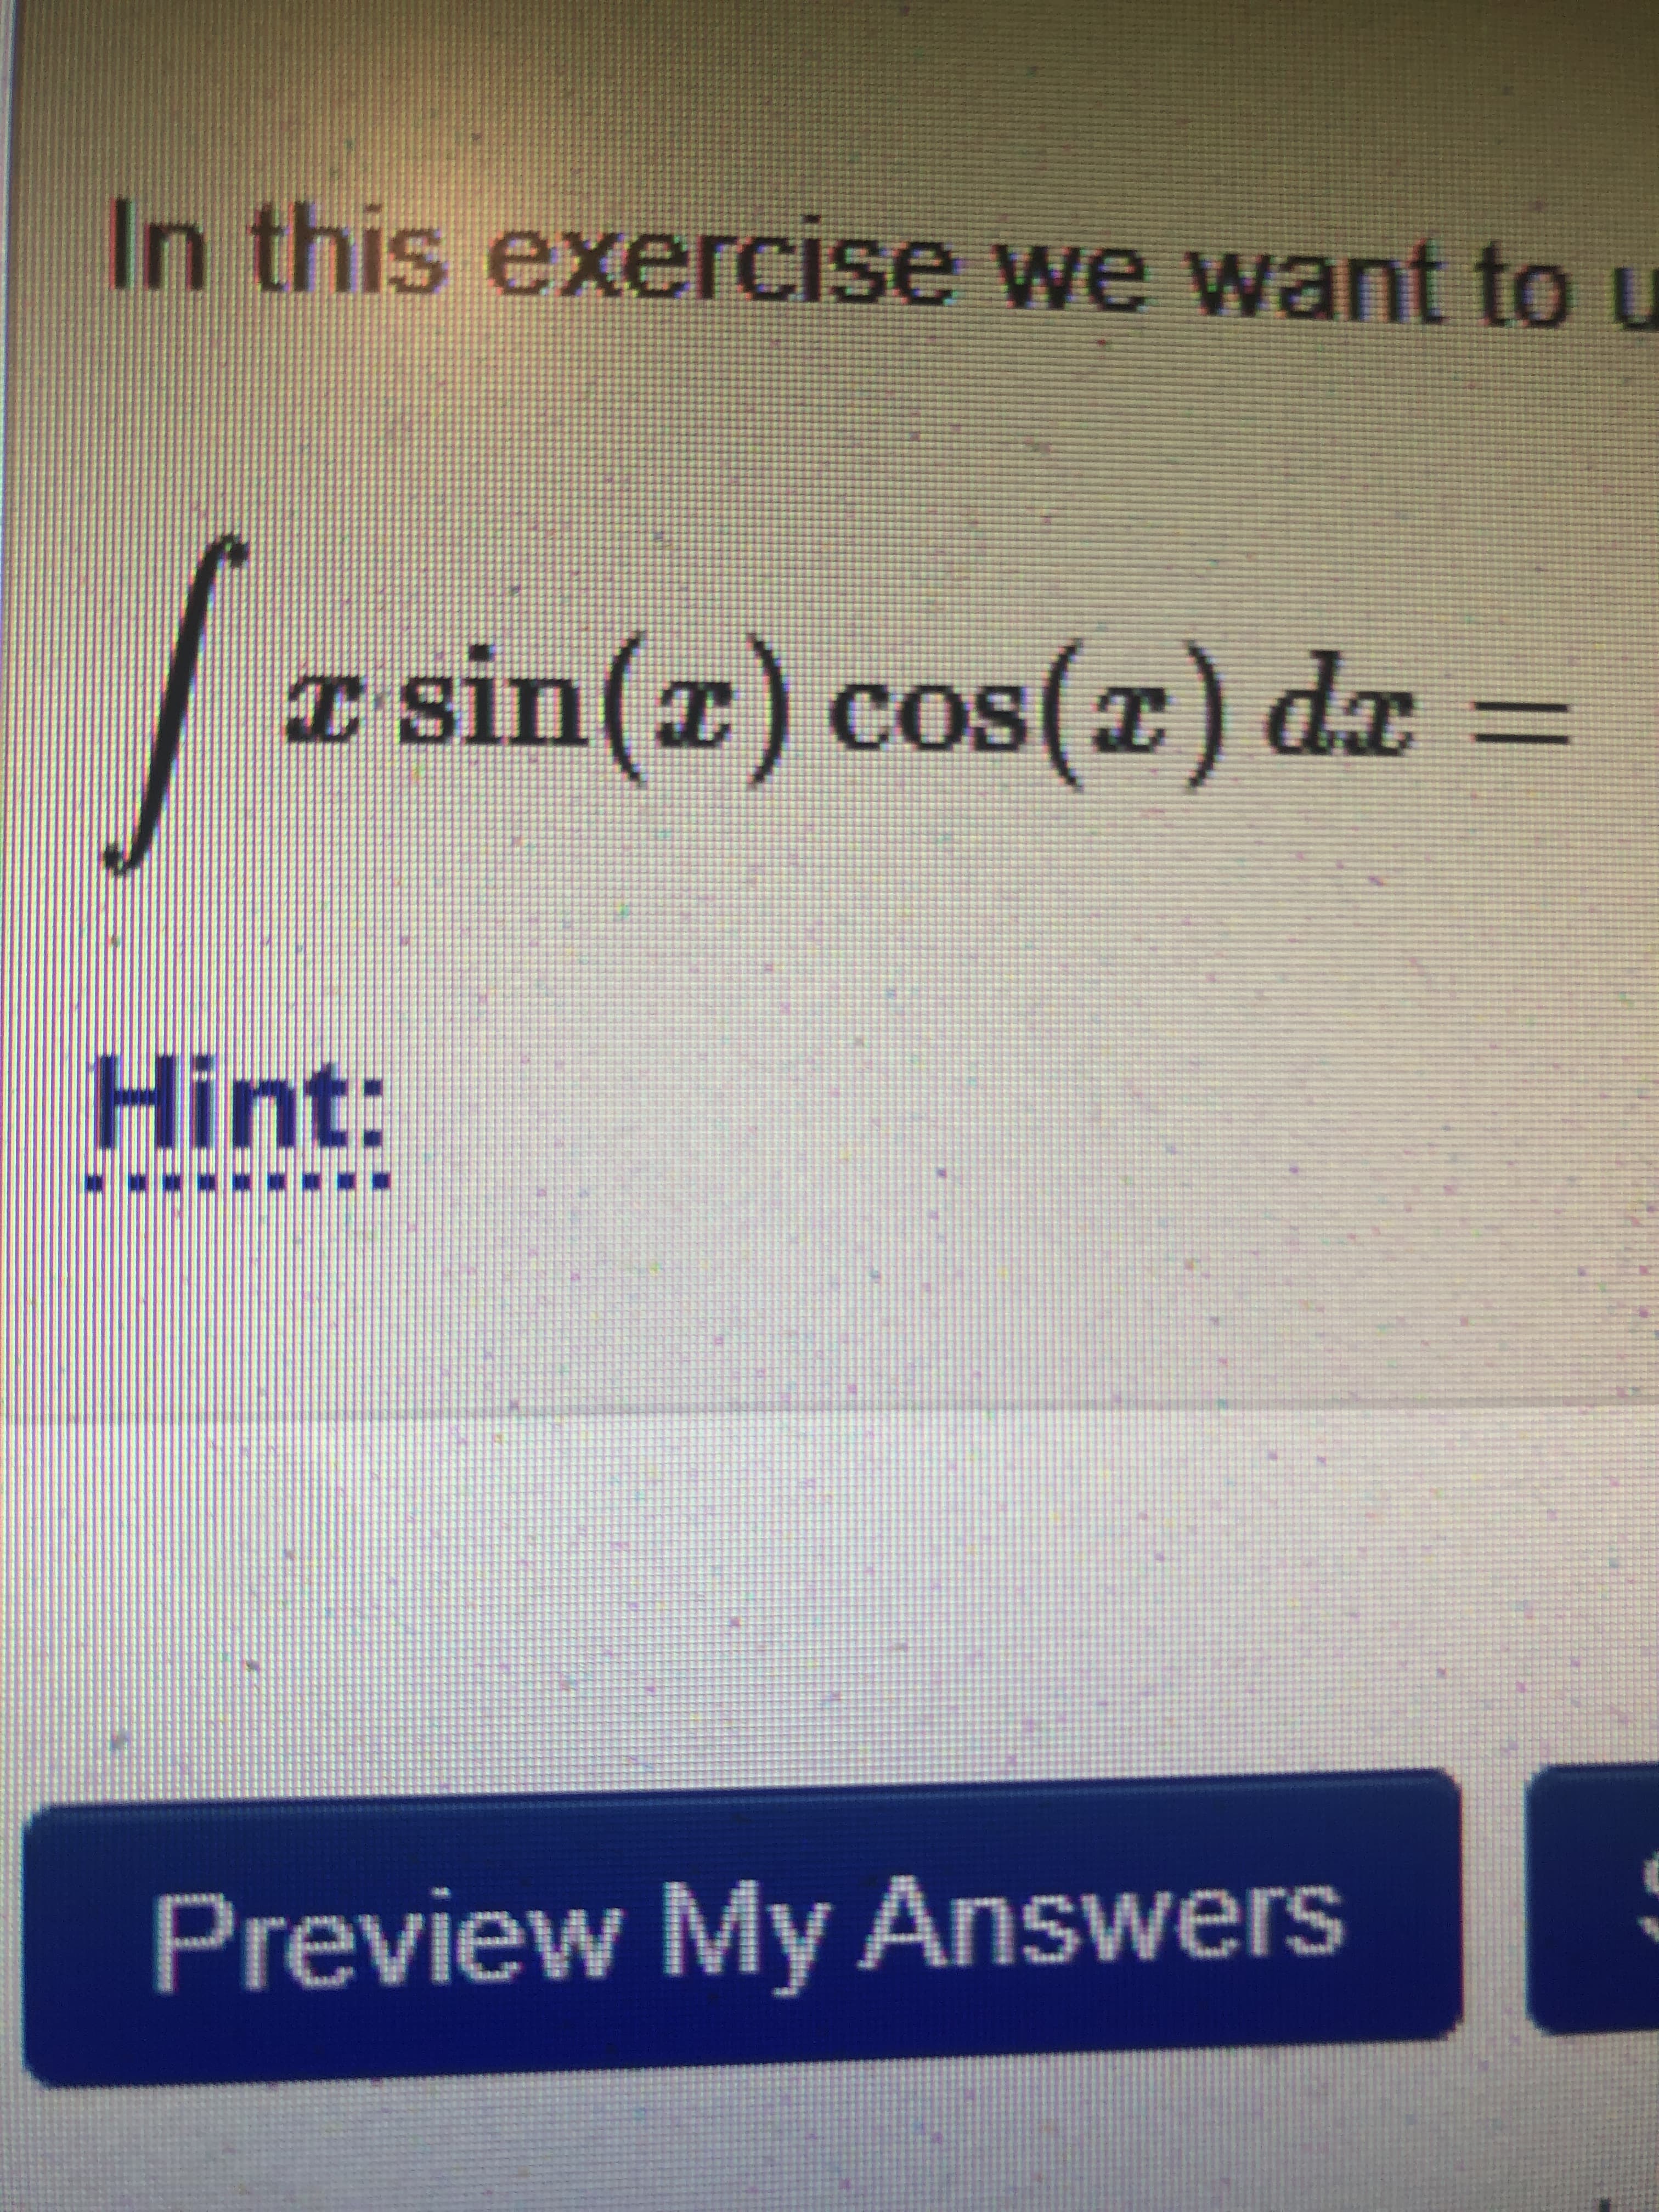 In this exercise we want to u
I sin(z) cos(r) dx =
IUIS A
%3D
Hint:
....
Preview My Answers
